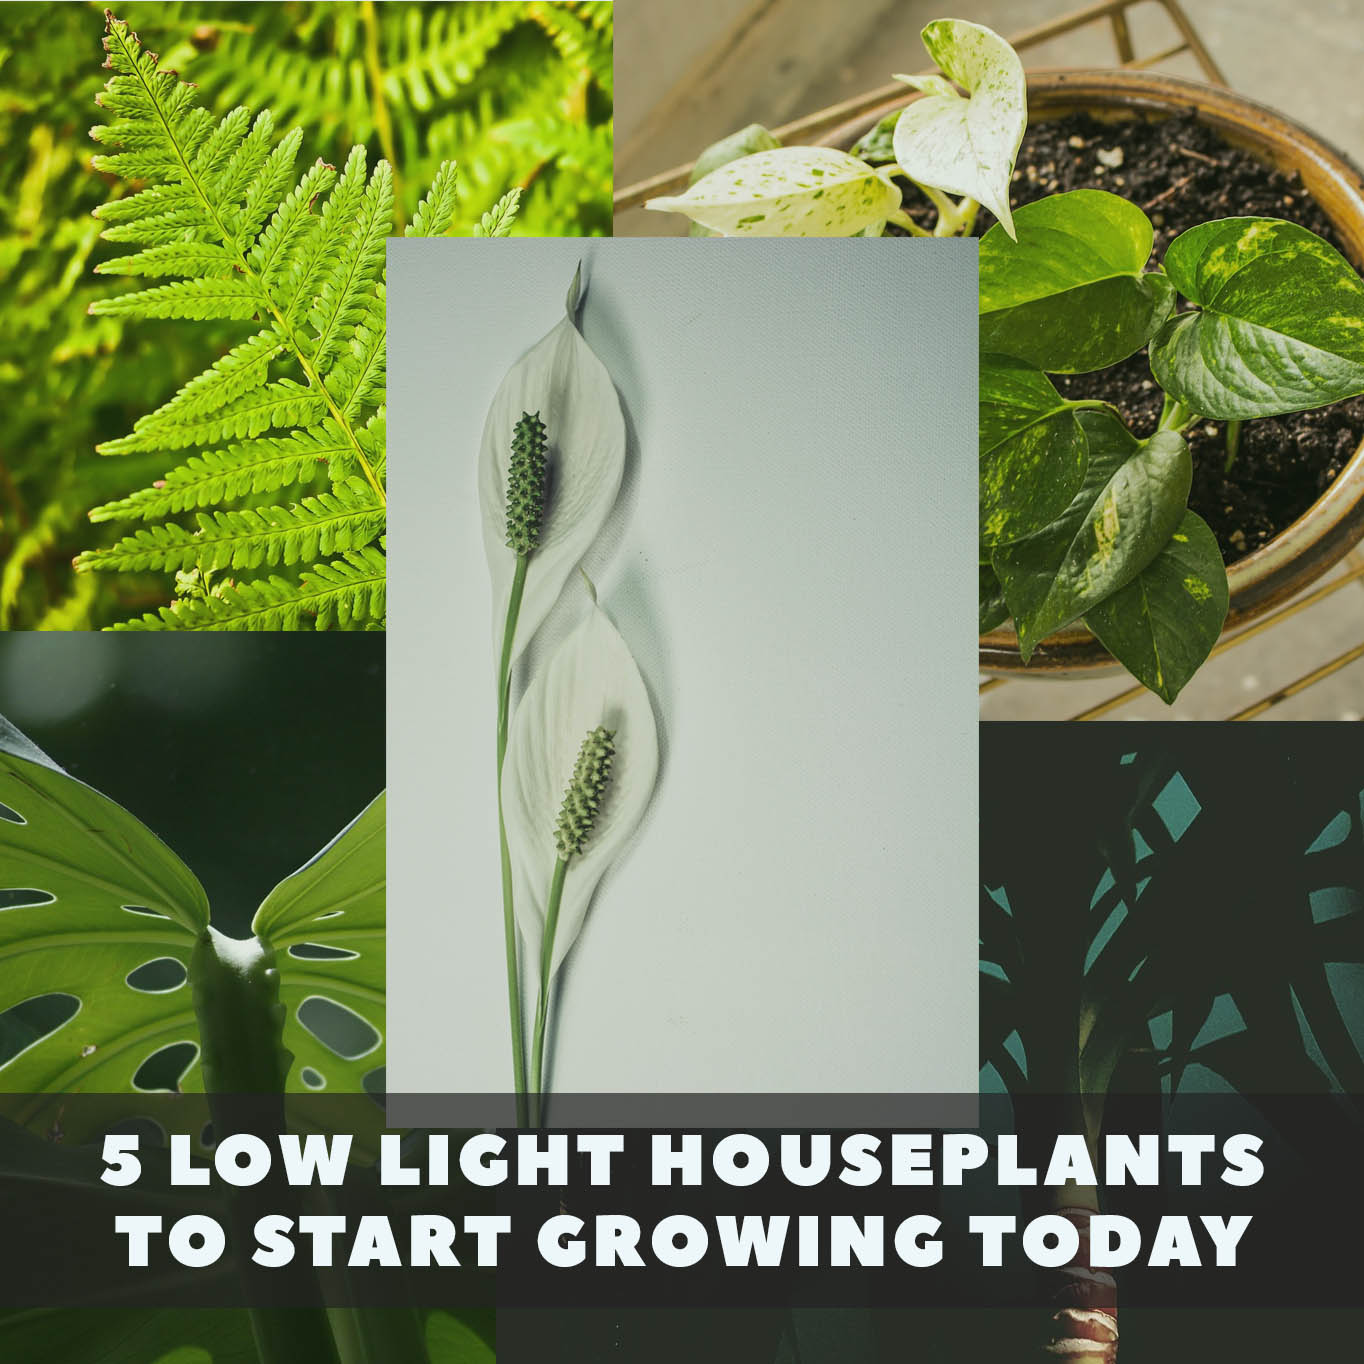 5 Low Light Houseplants To Start Growing Today